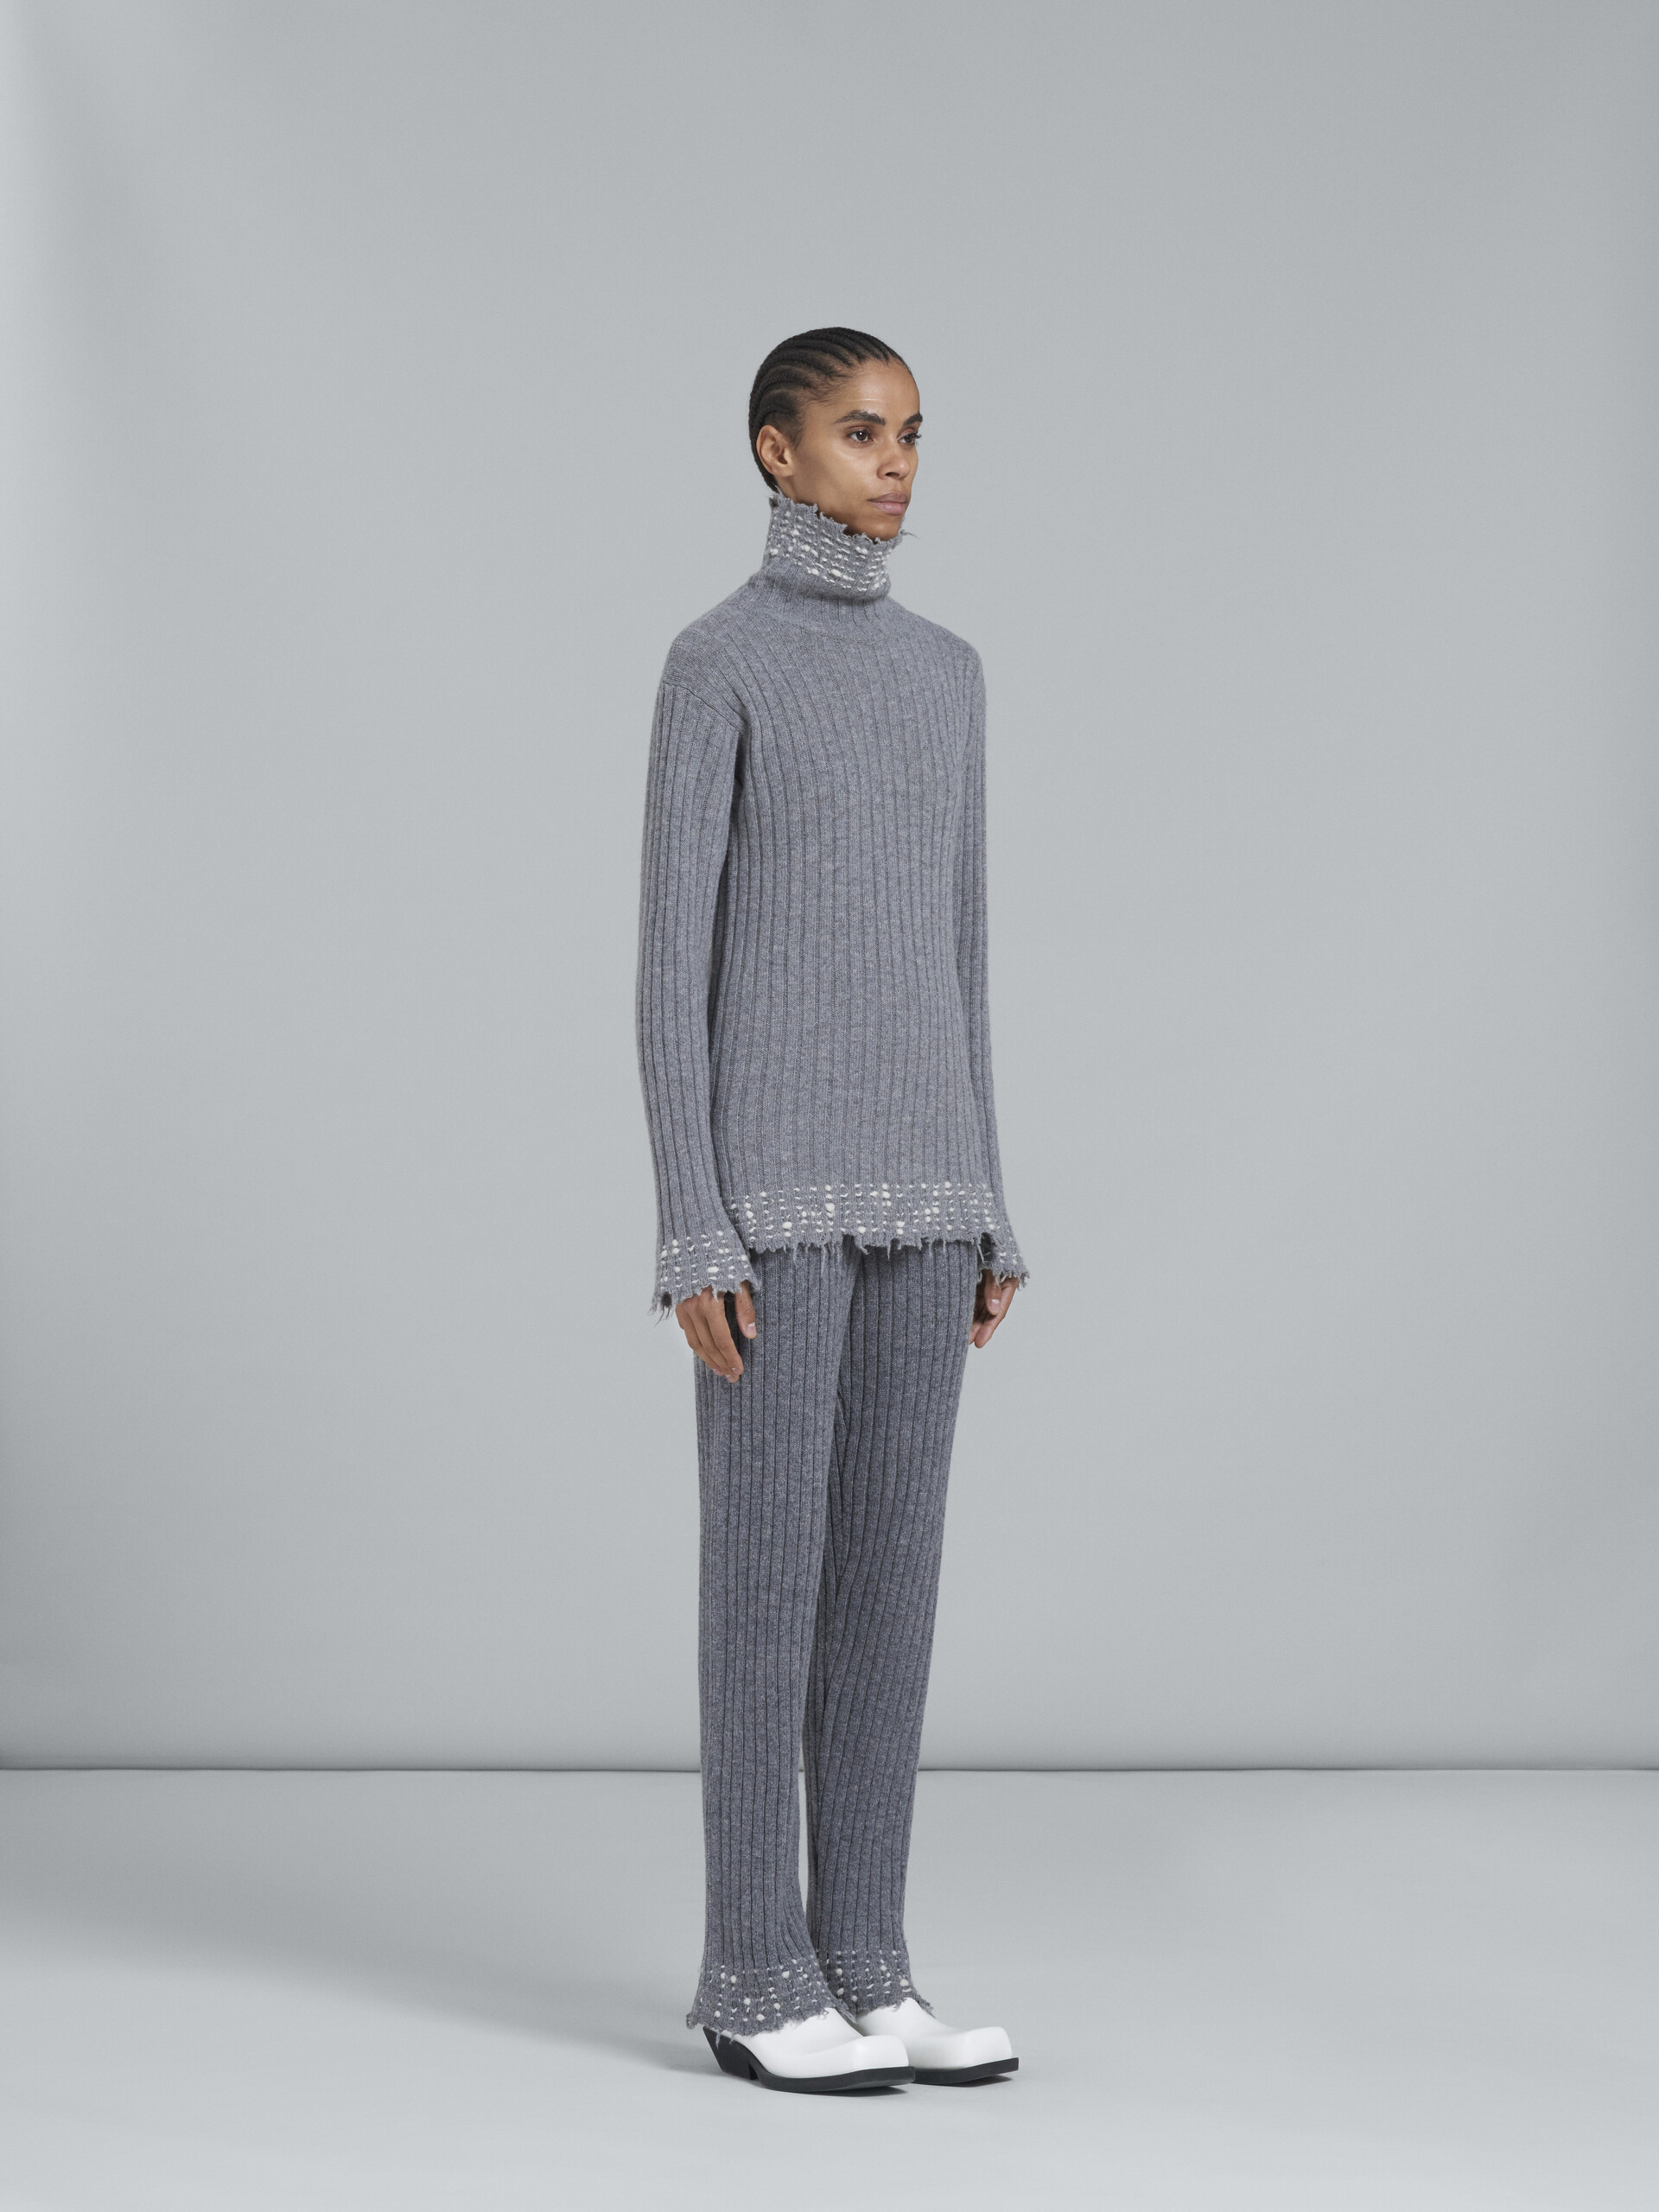 Grey knitted turtleneck - Pullovers - Image 5